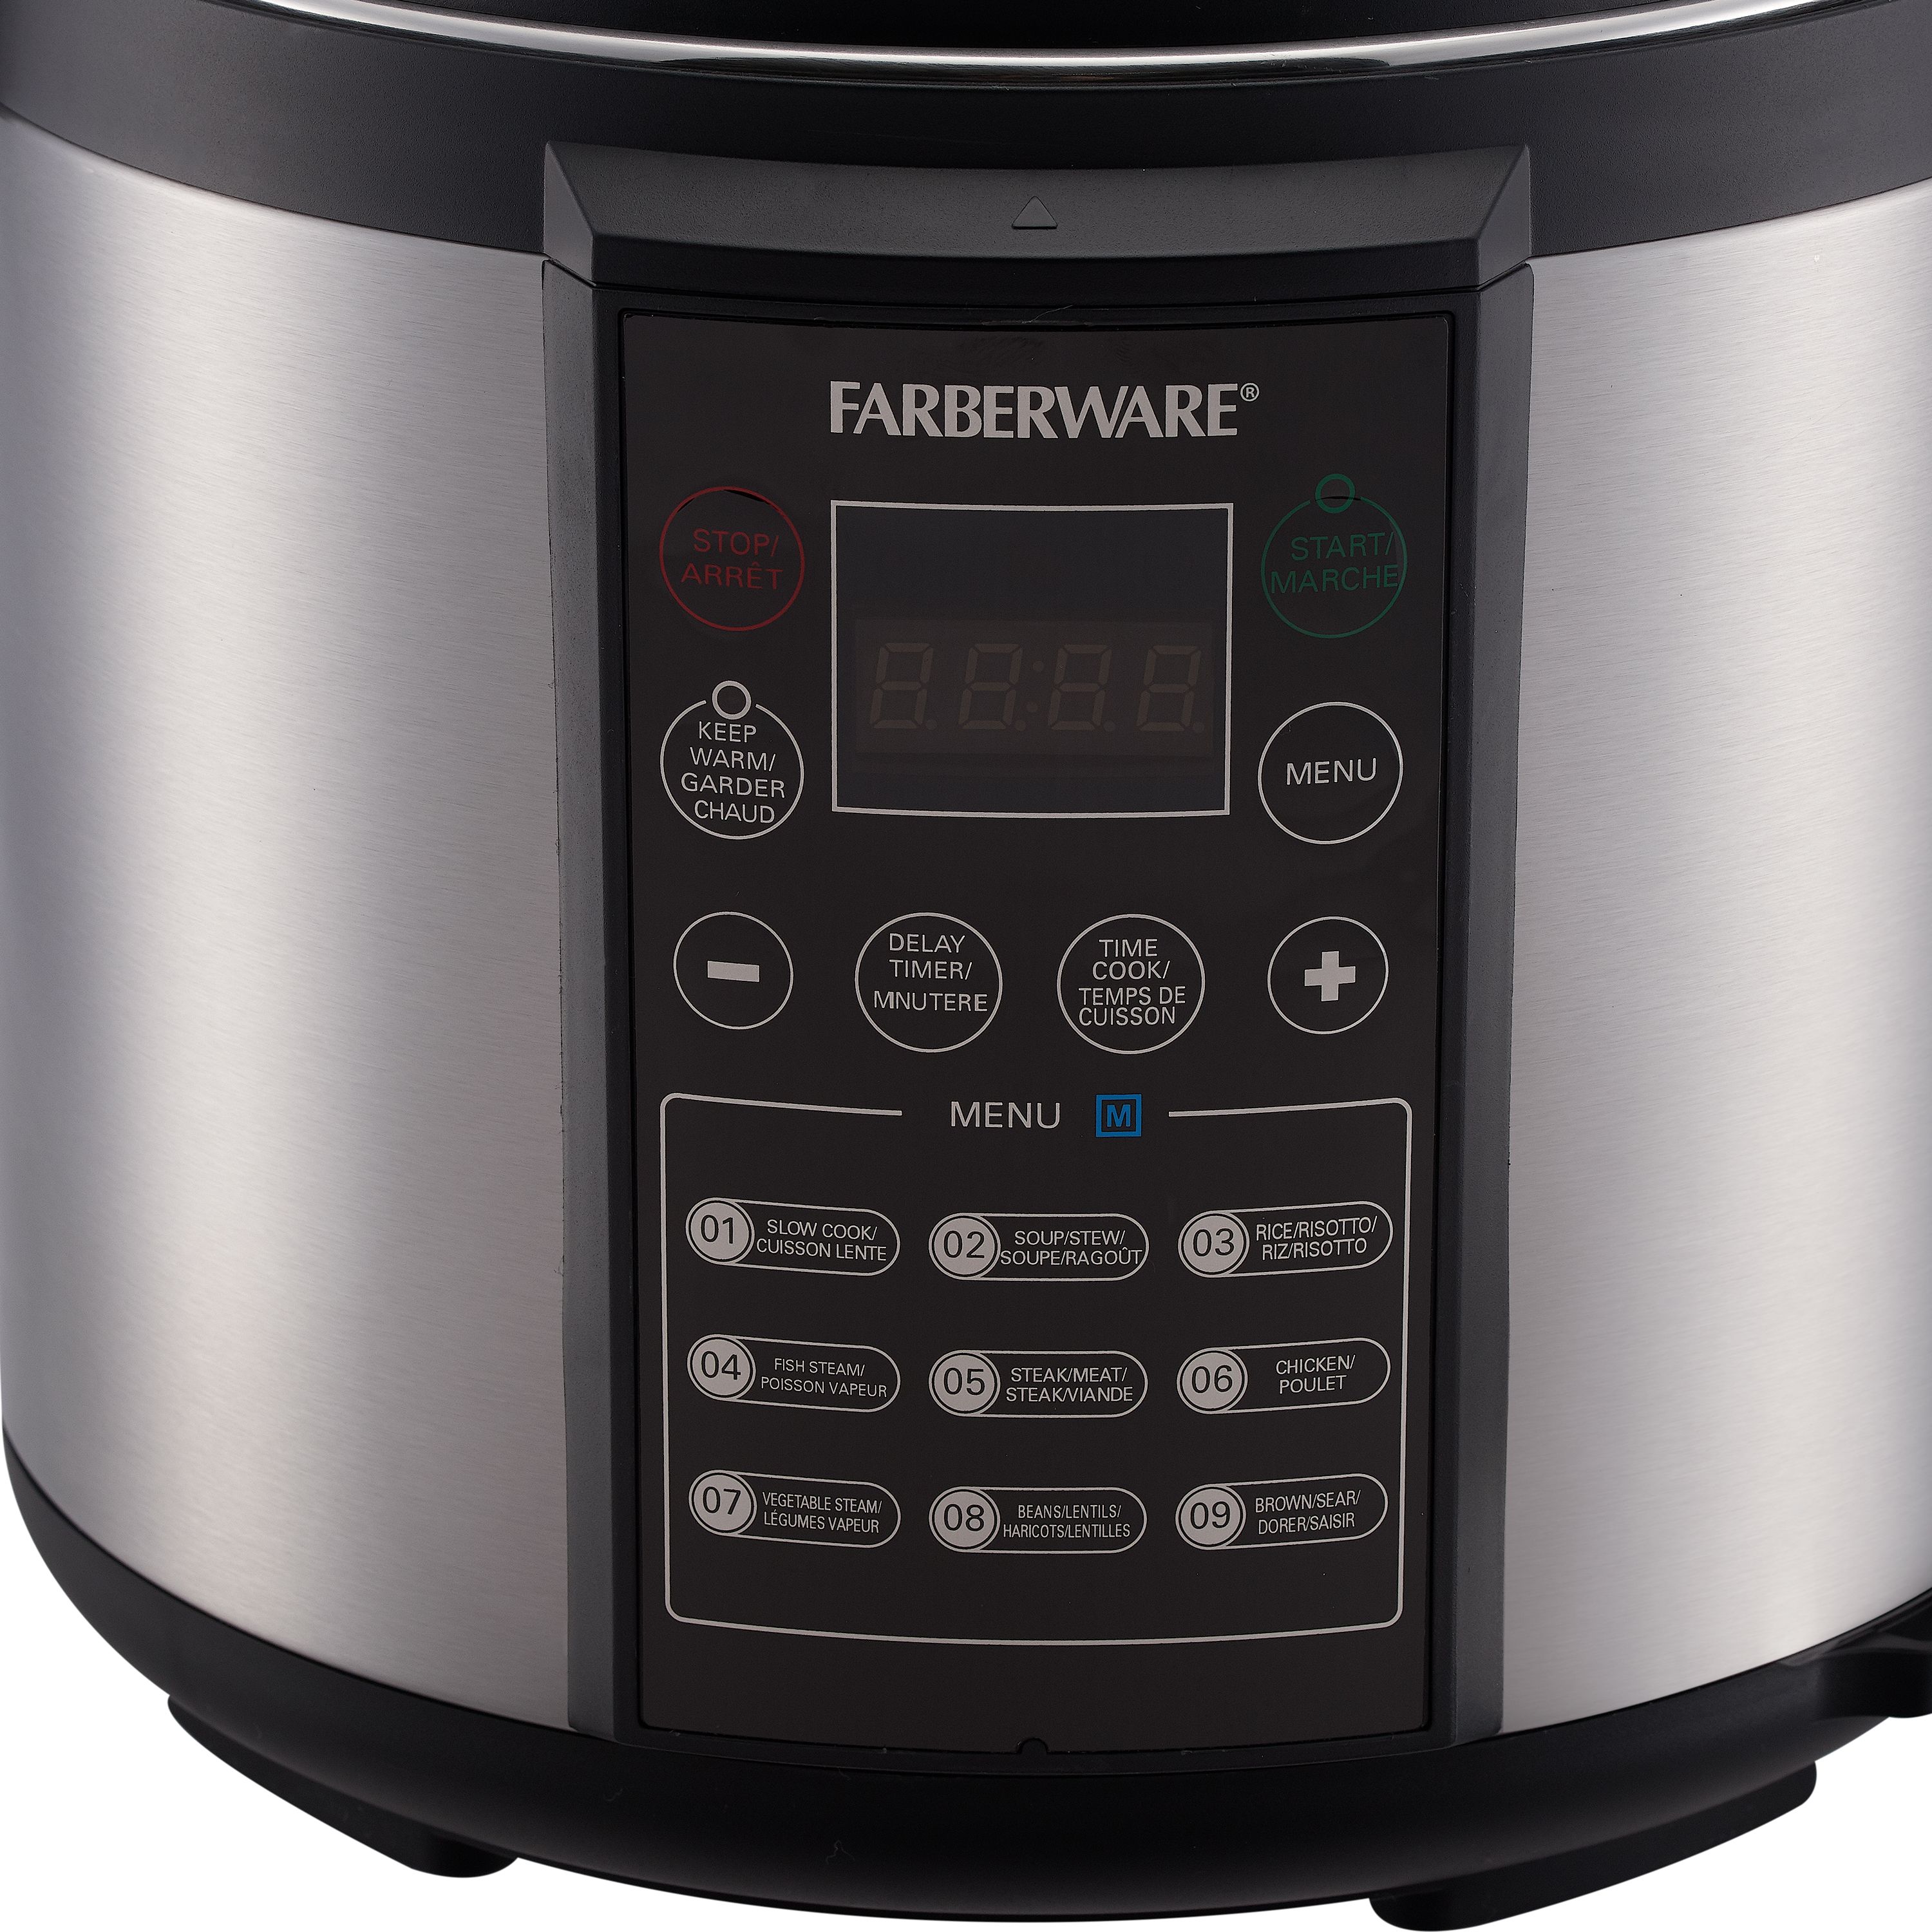 Electric Pressure Cookers With Delayed Cooking Timers - Corrie Cooks